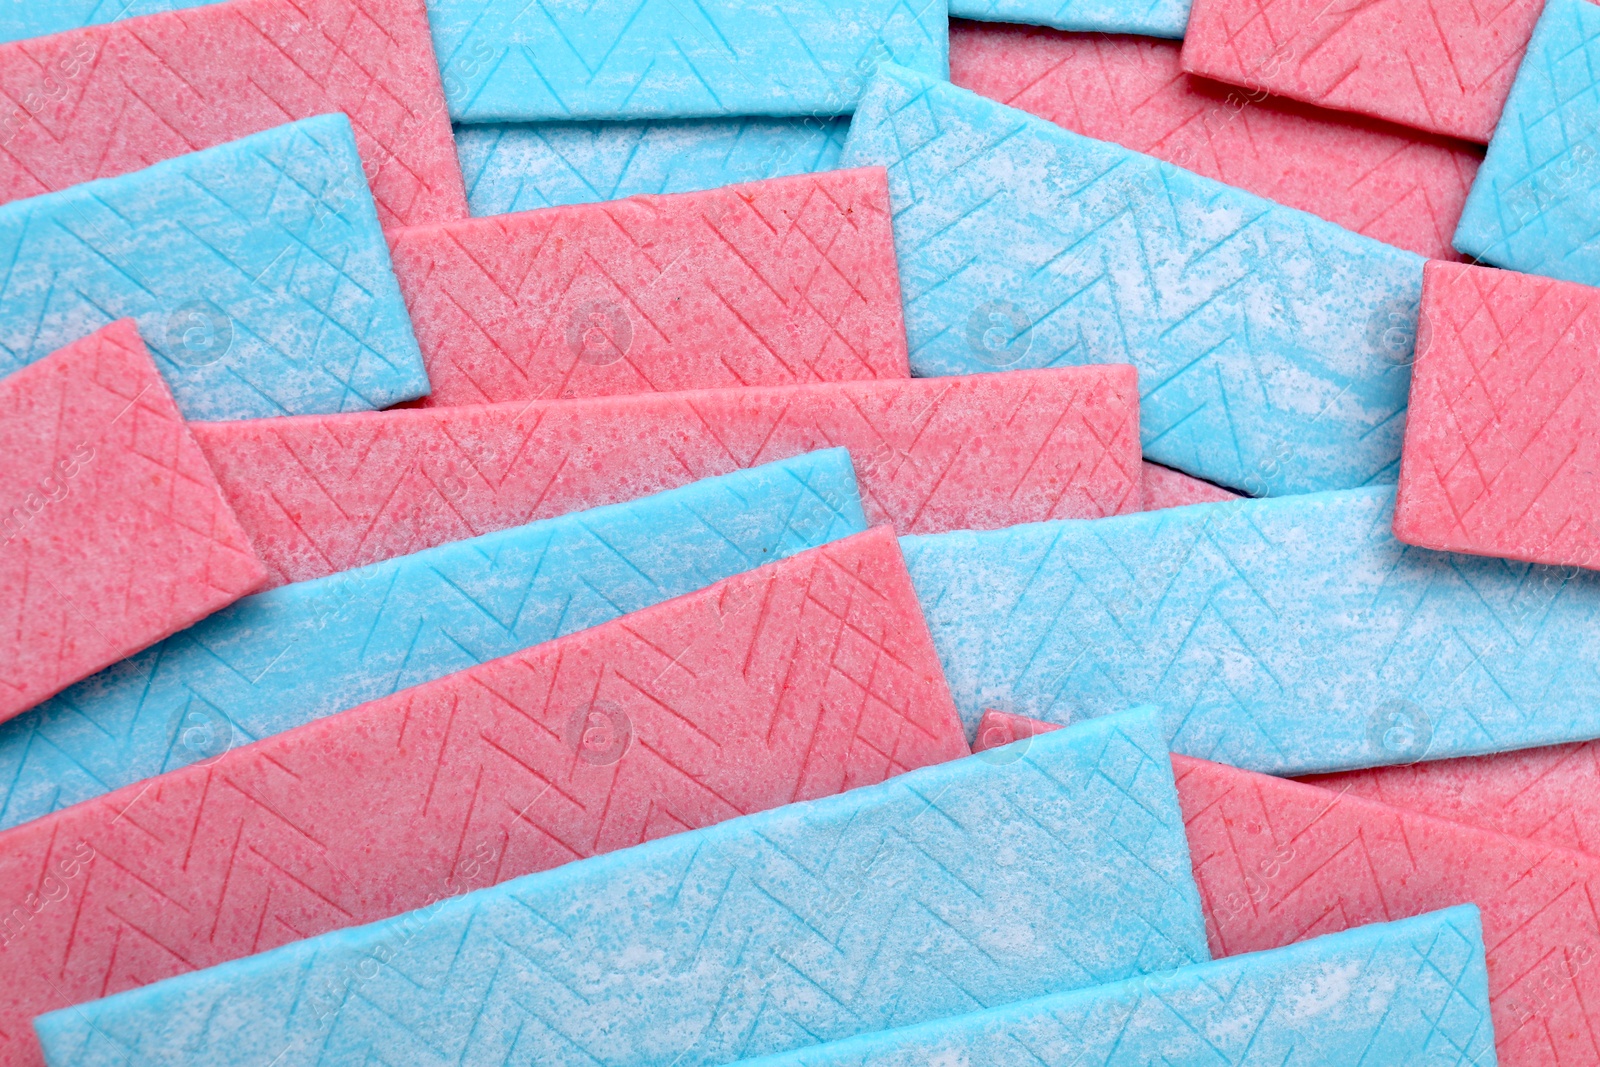 Photo of Sticks of tasty chewing gum as background, top view